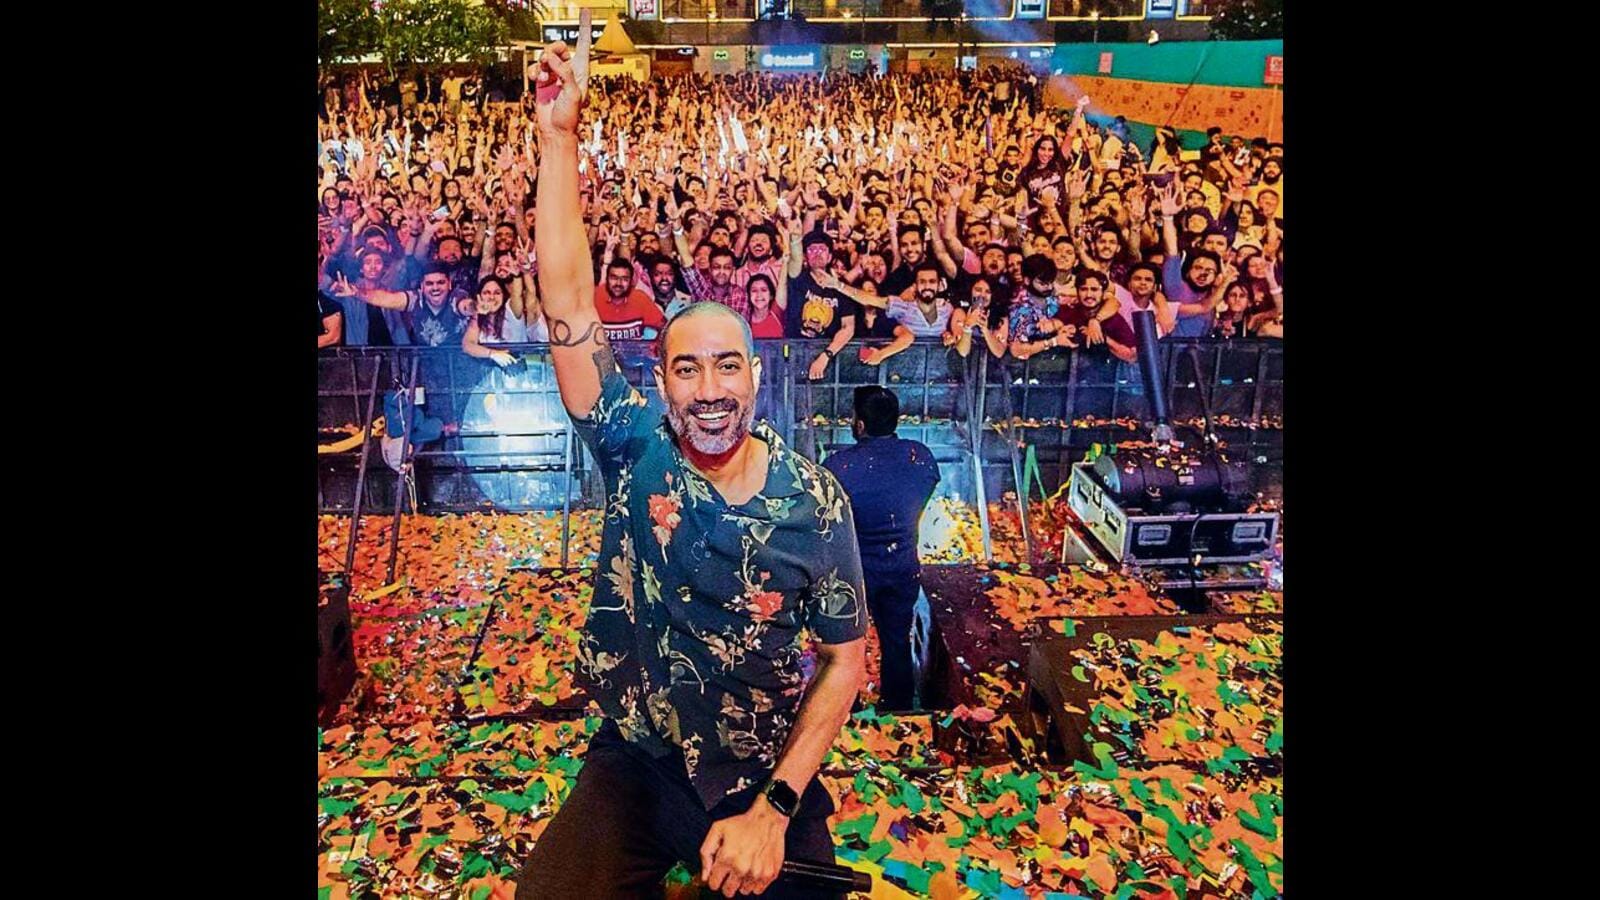 You can collab only if your numbers match: Nucleya